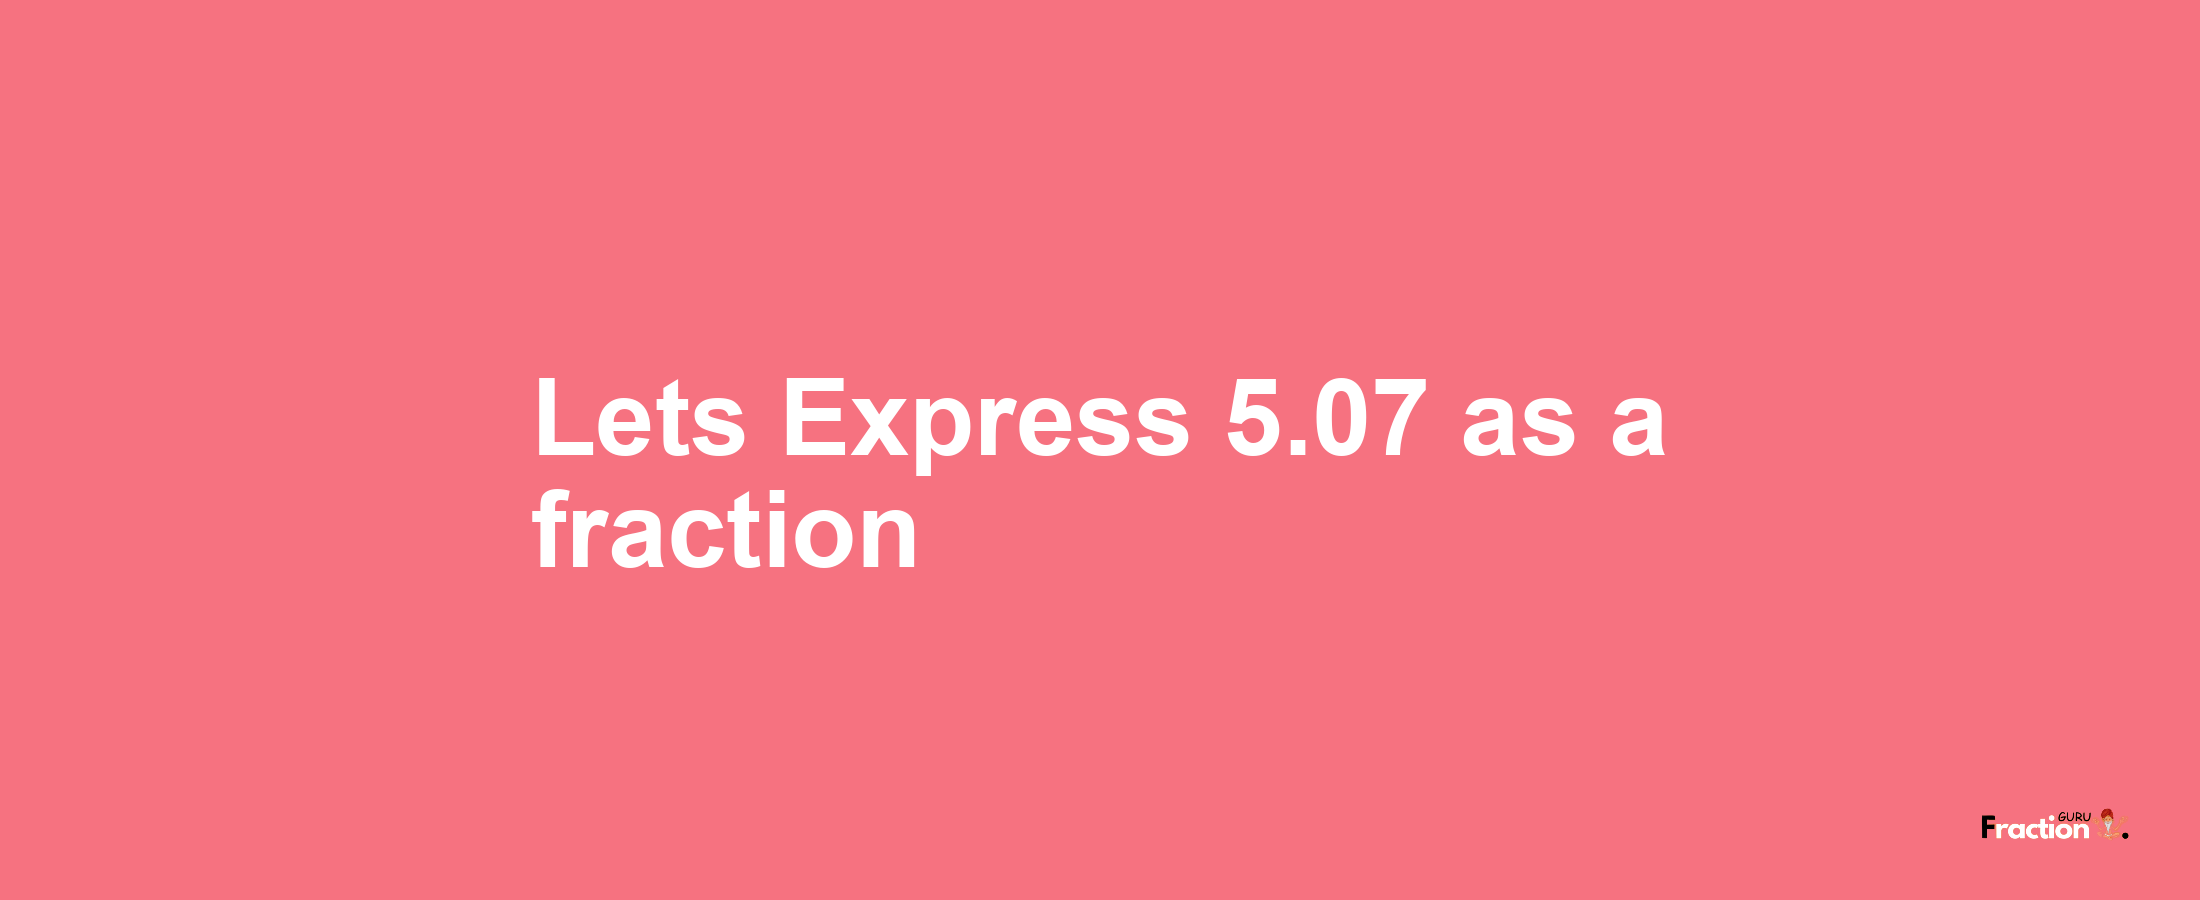 Lets Express 5.07 as afraction